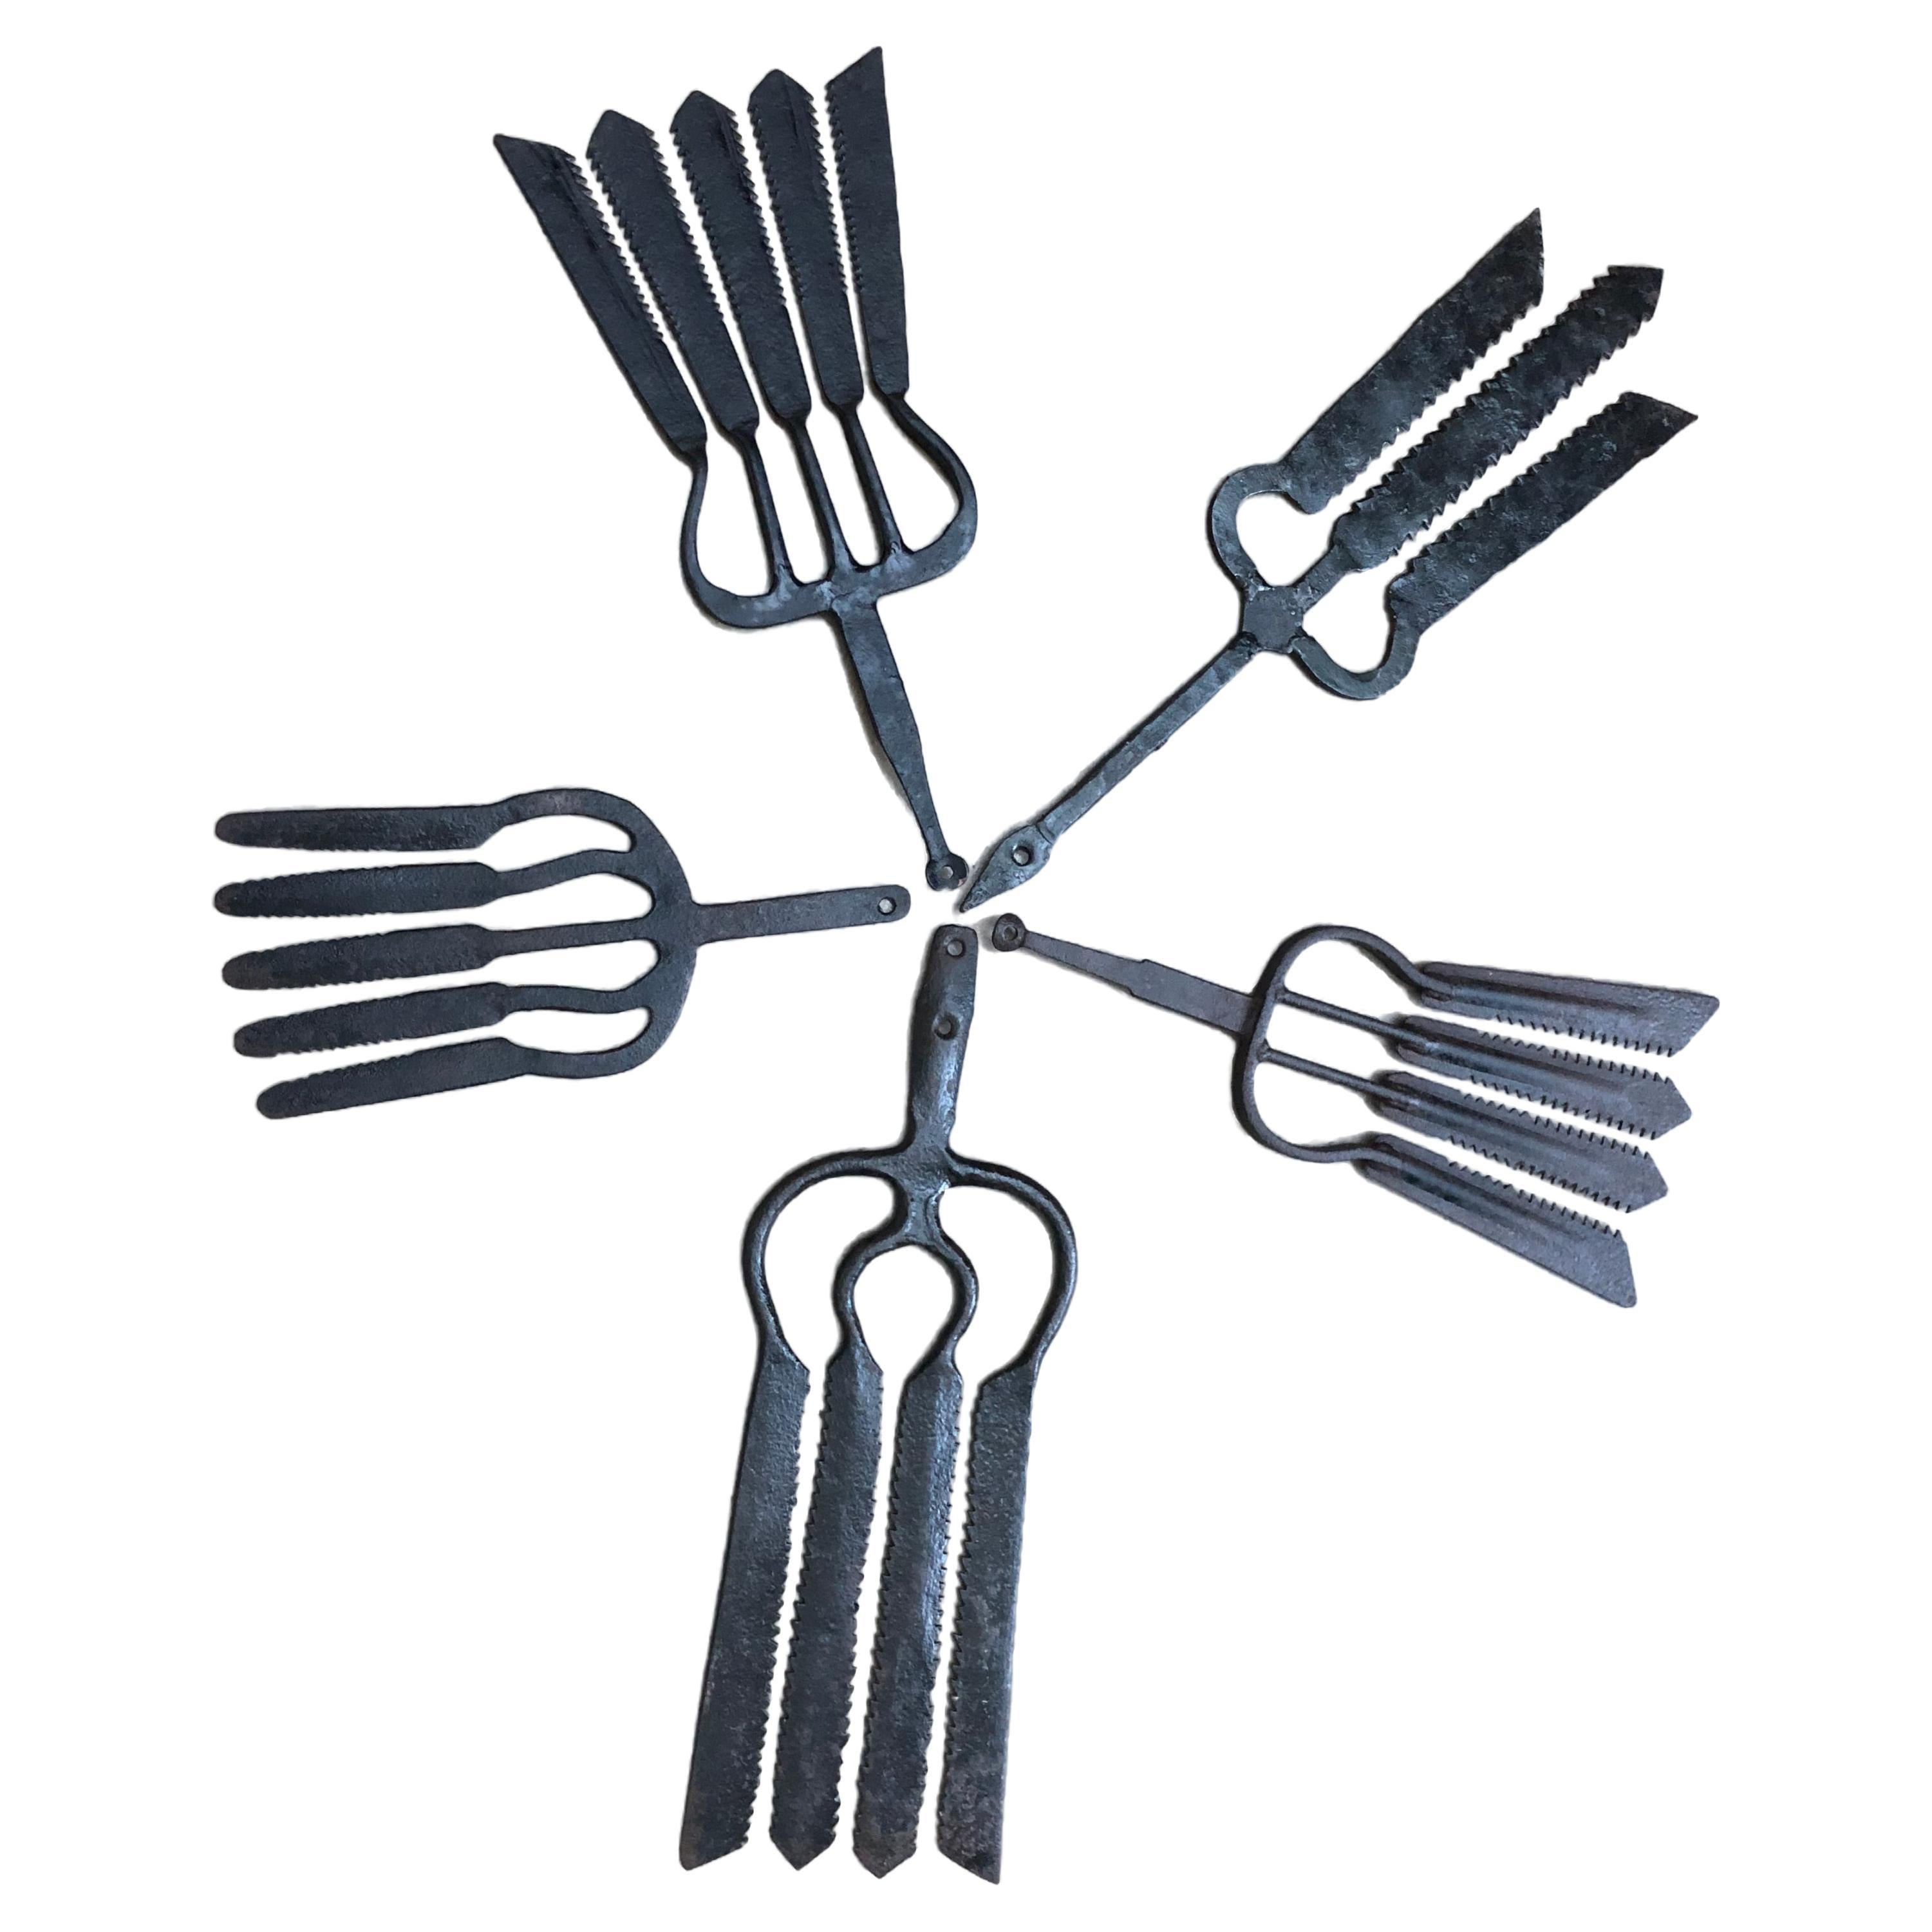 Collection of 5 Antique Wrought Iron Eel Forks For Sale